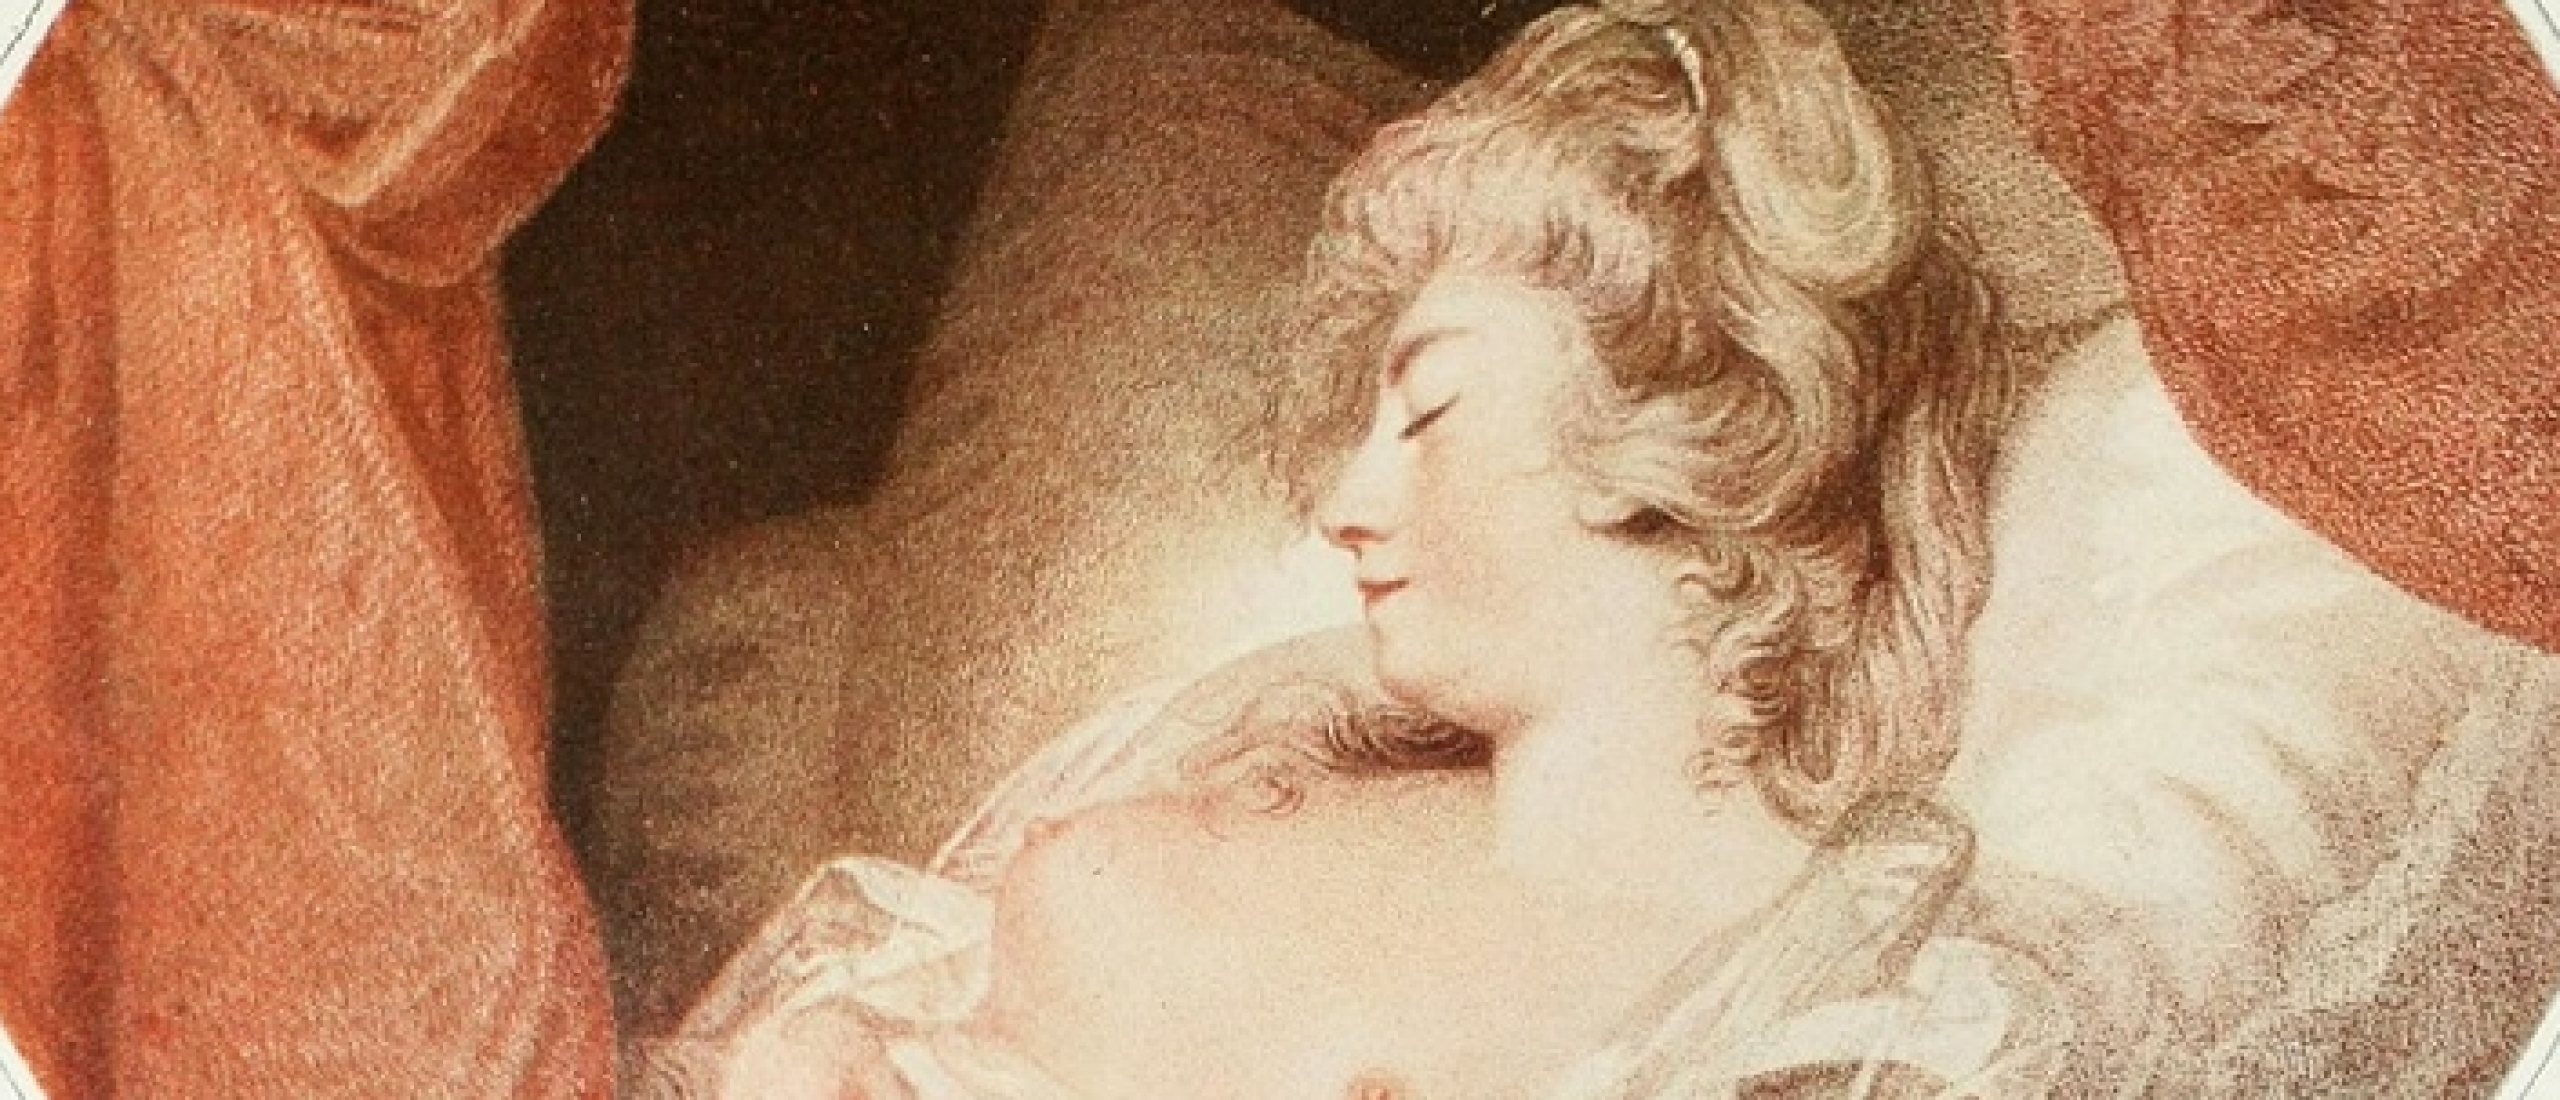 Matthew William Peters Young Lady In Bed